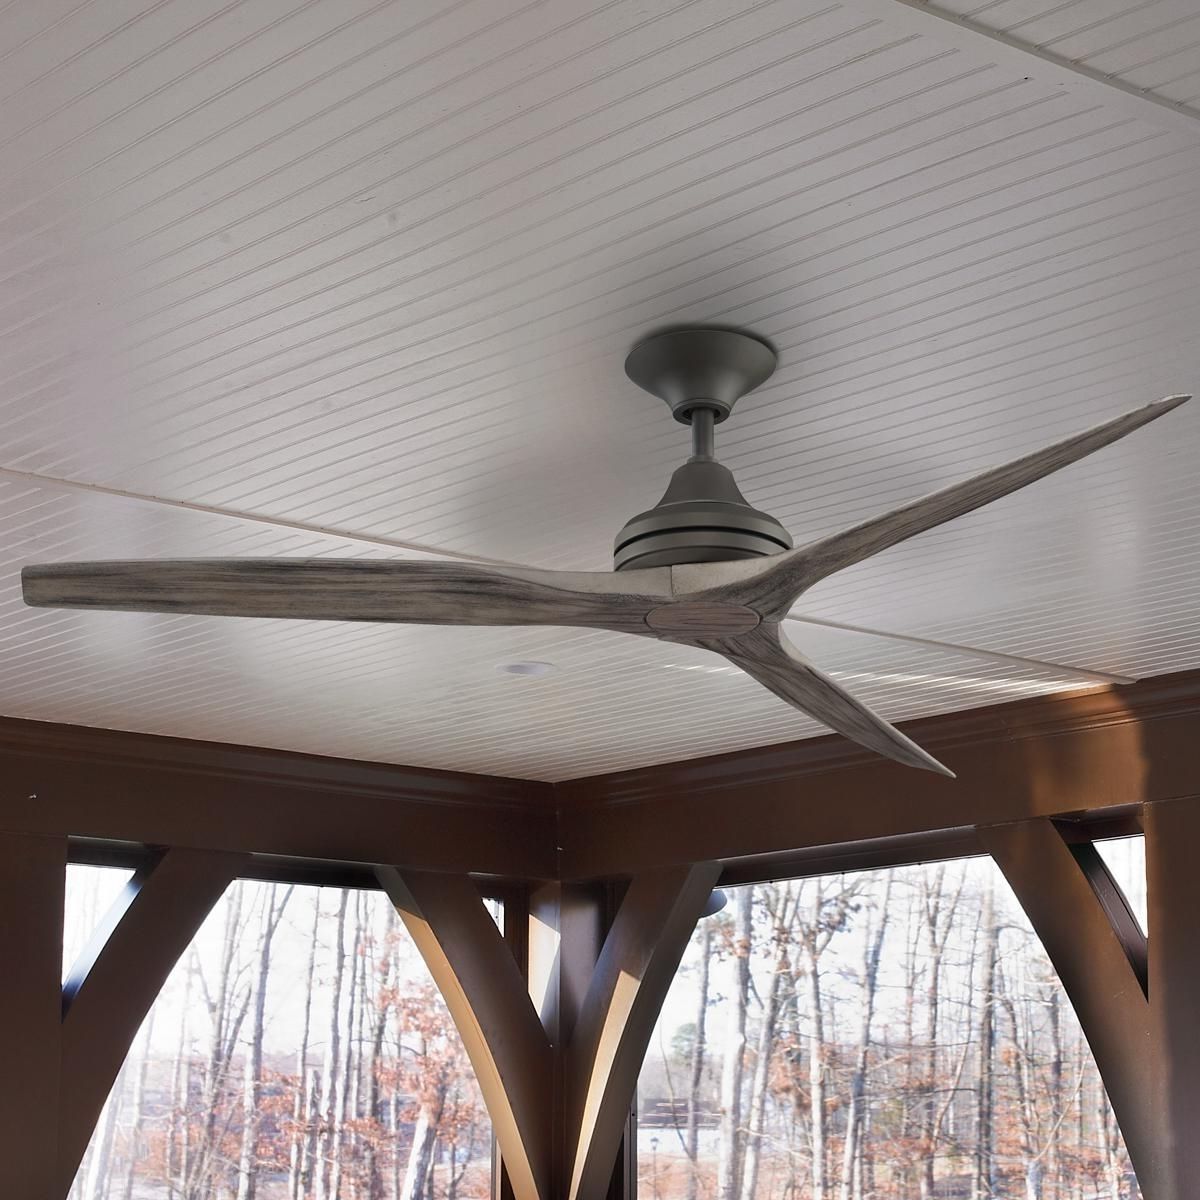 Farmhouse Chic Intended For Well Known Contemporary Outdoor Ceiling Fans (View 7 of 20)